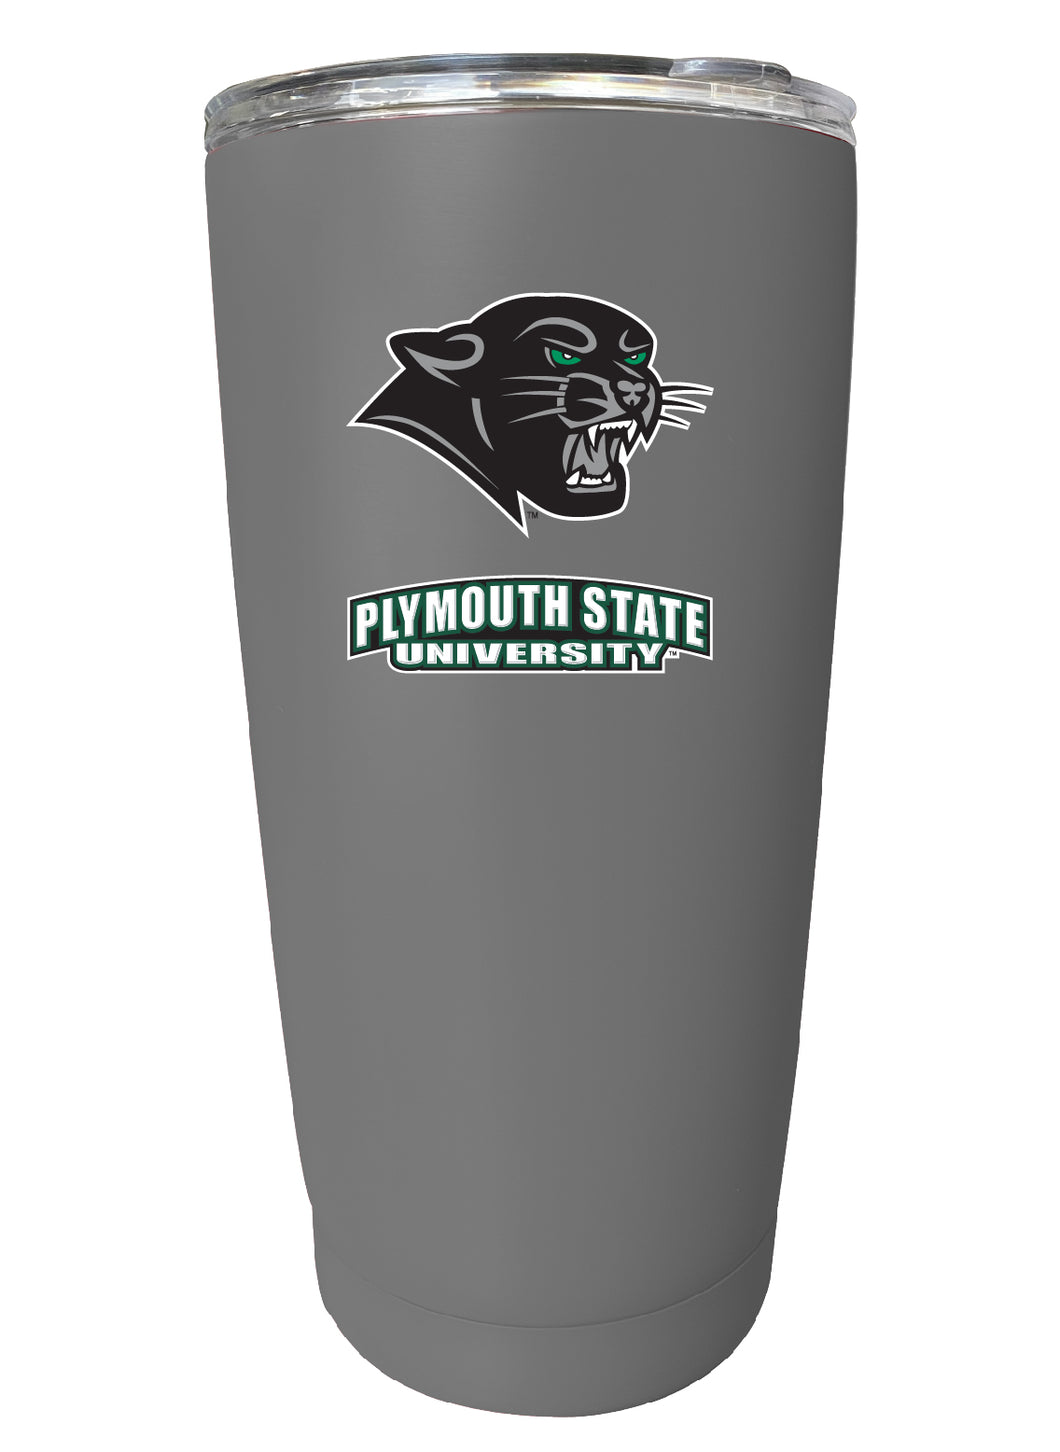 Plymouth State University NCAA Insulated Tumbler - 16oz Stainless Steel Travel Mug 